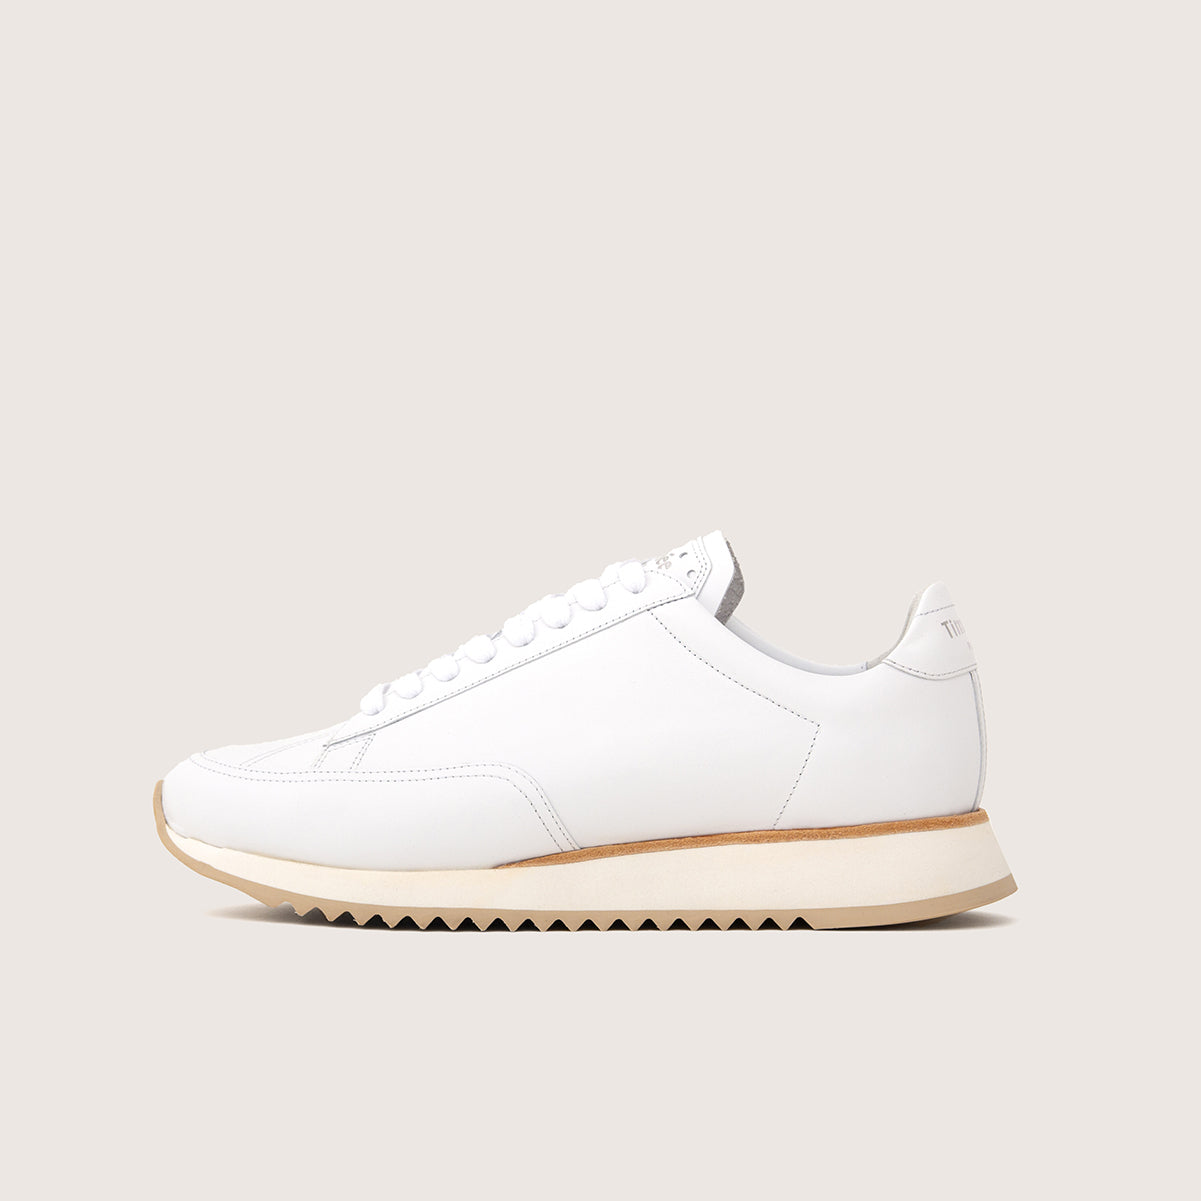 sneaker-cabourg-nappa-all-white-timothee-paris-side-view-lifestyle-brand-big-size-picture